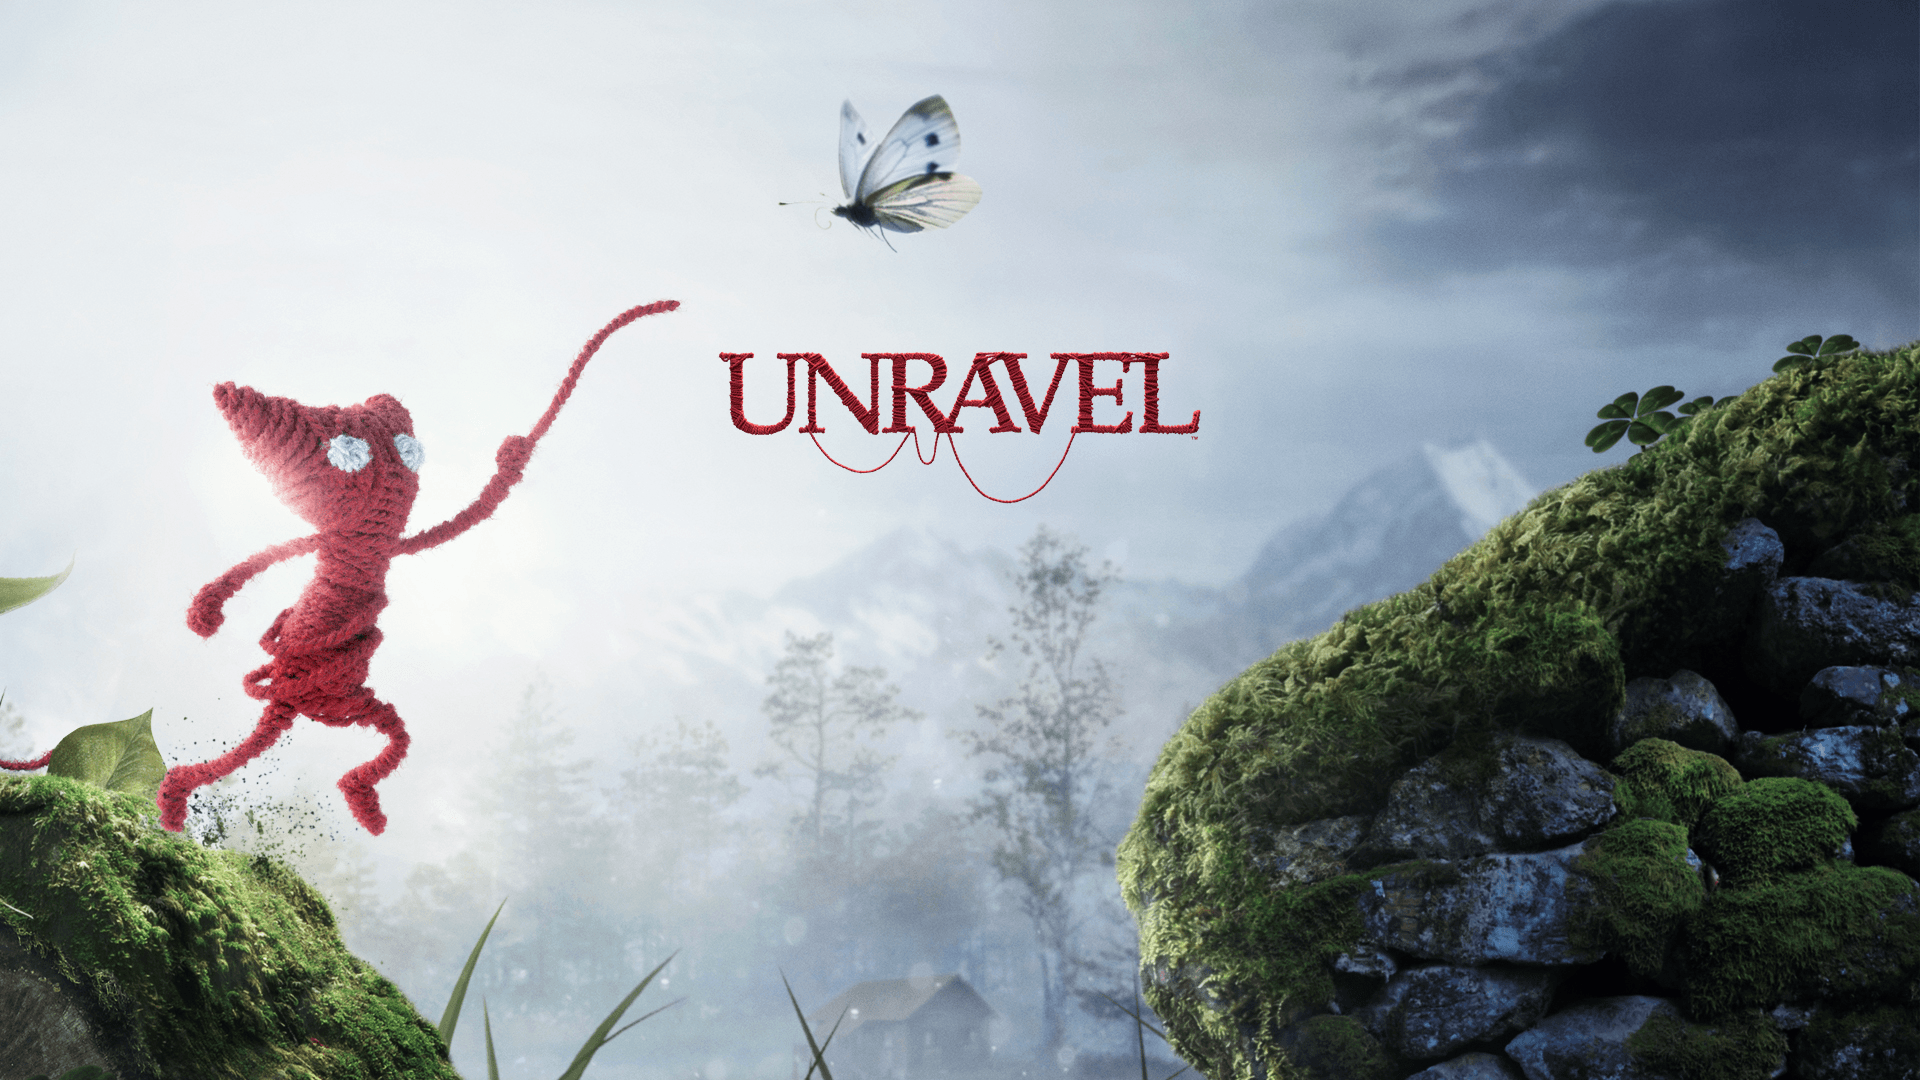 Unravel Game